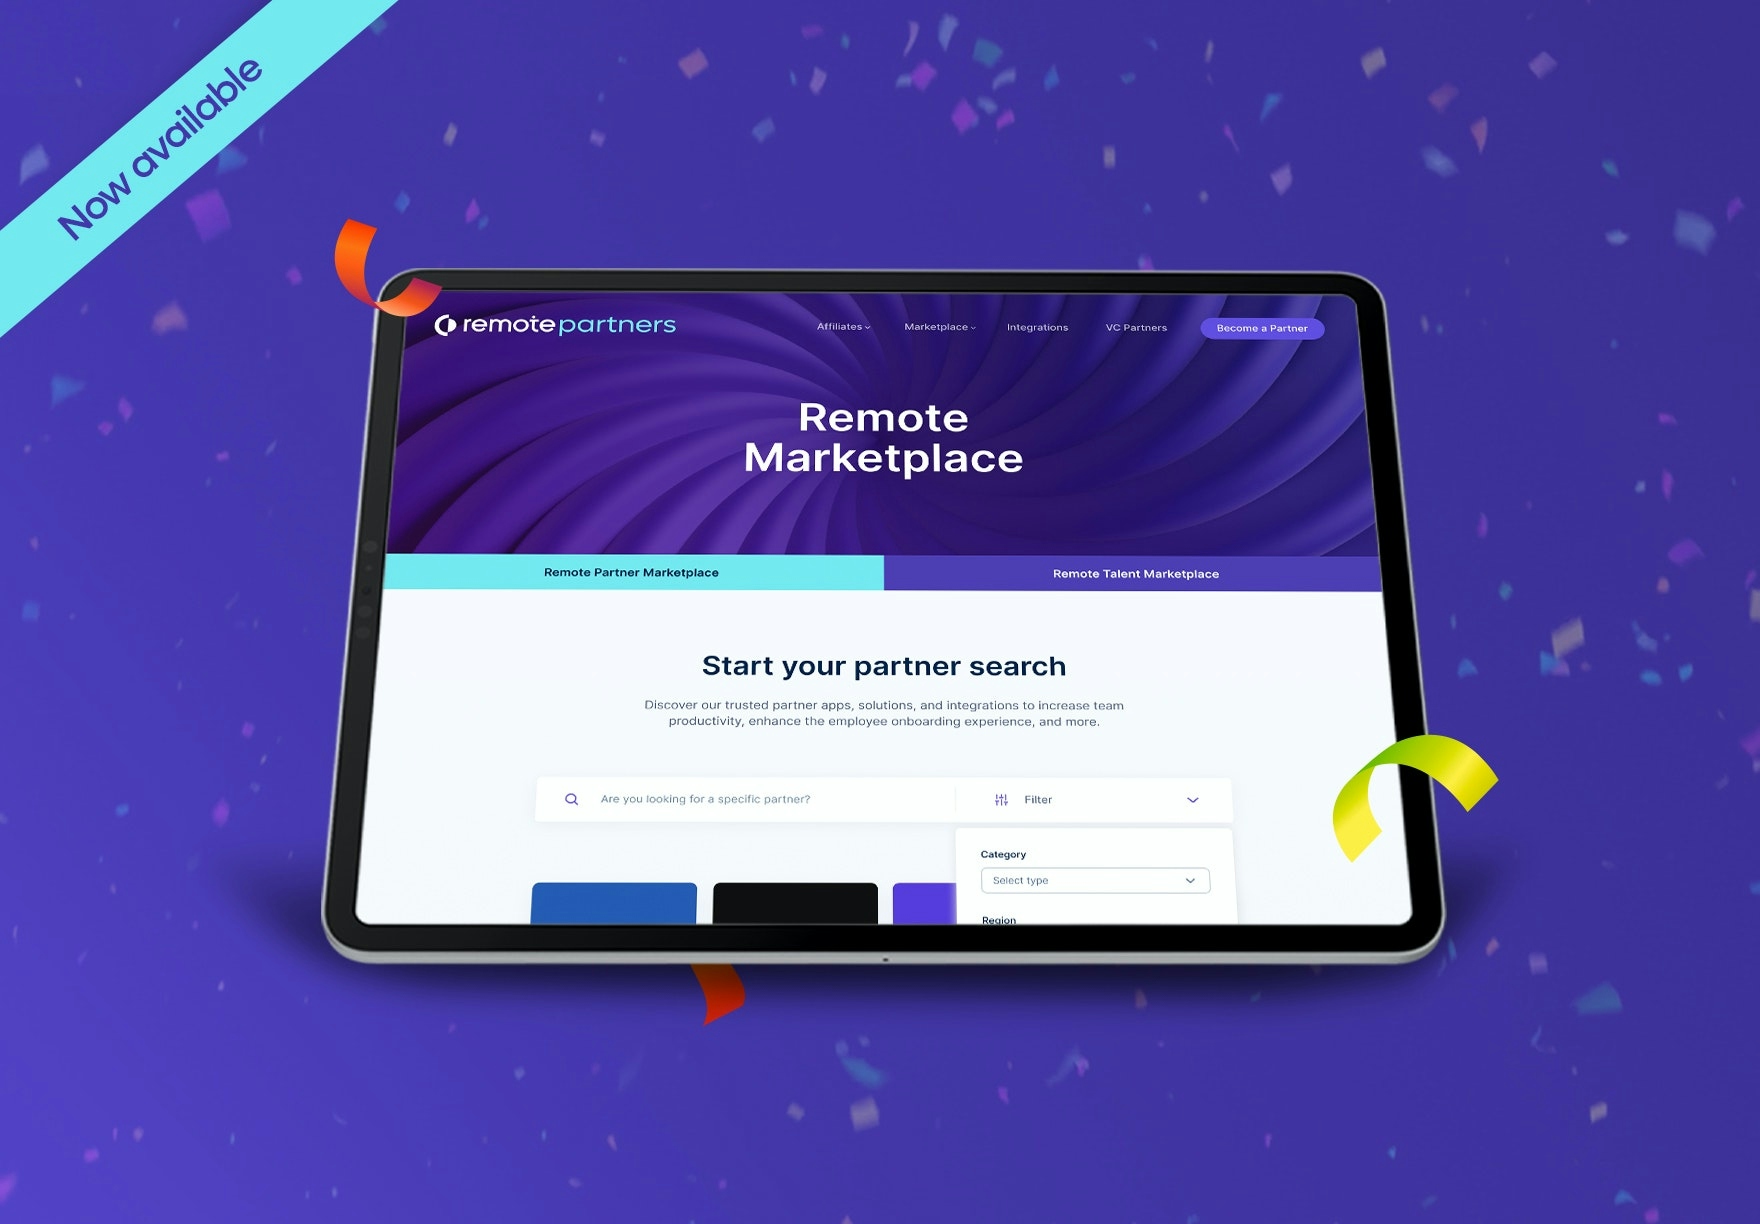 Your first look at the Remote Marketplace